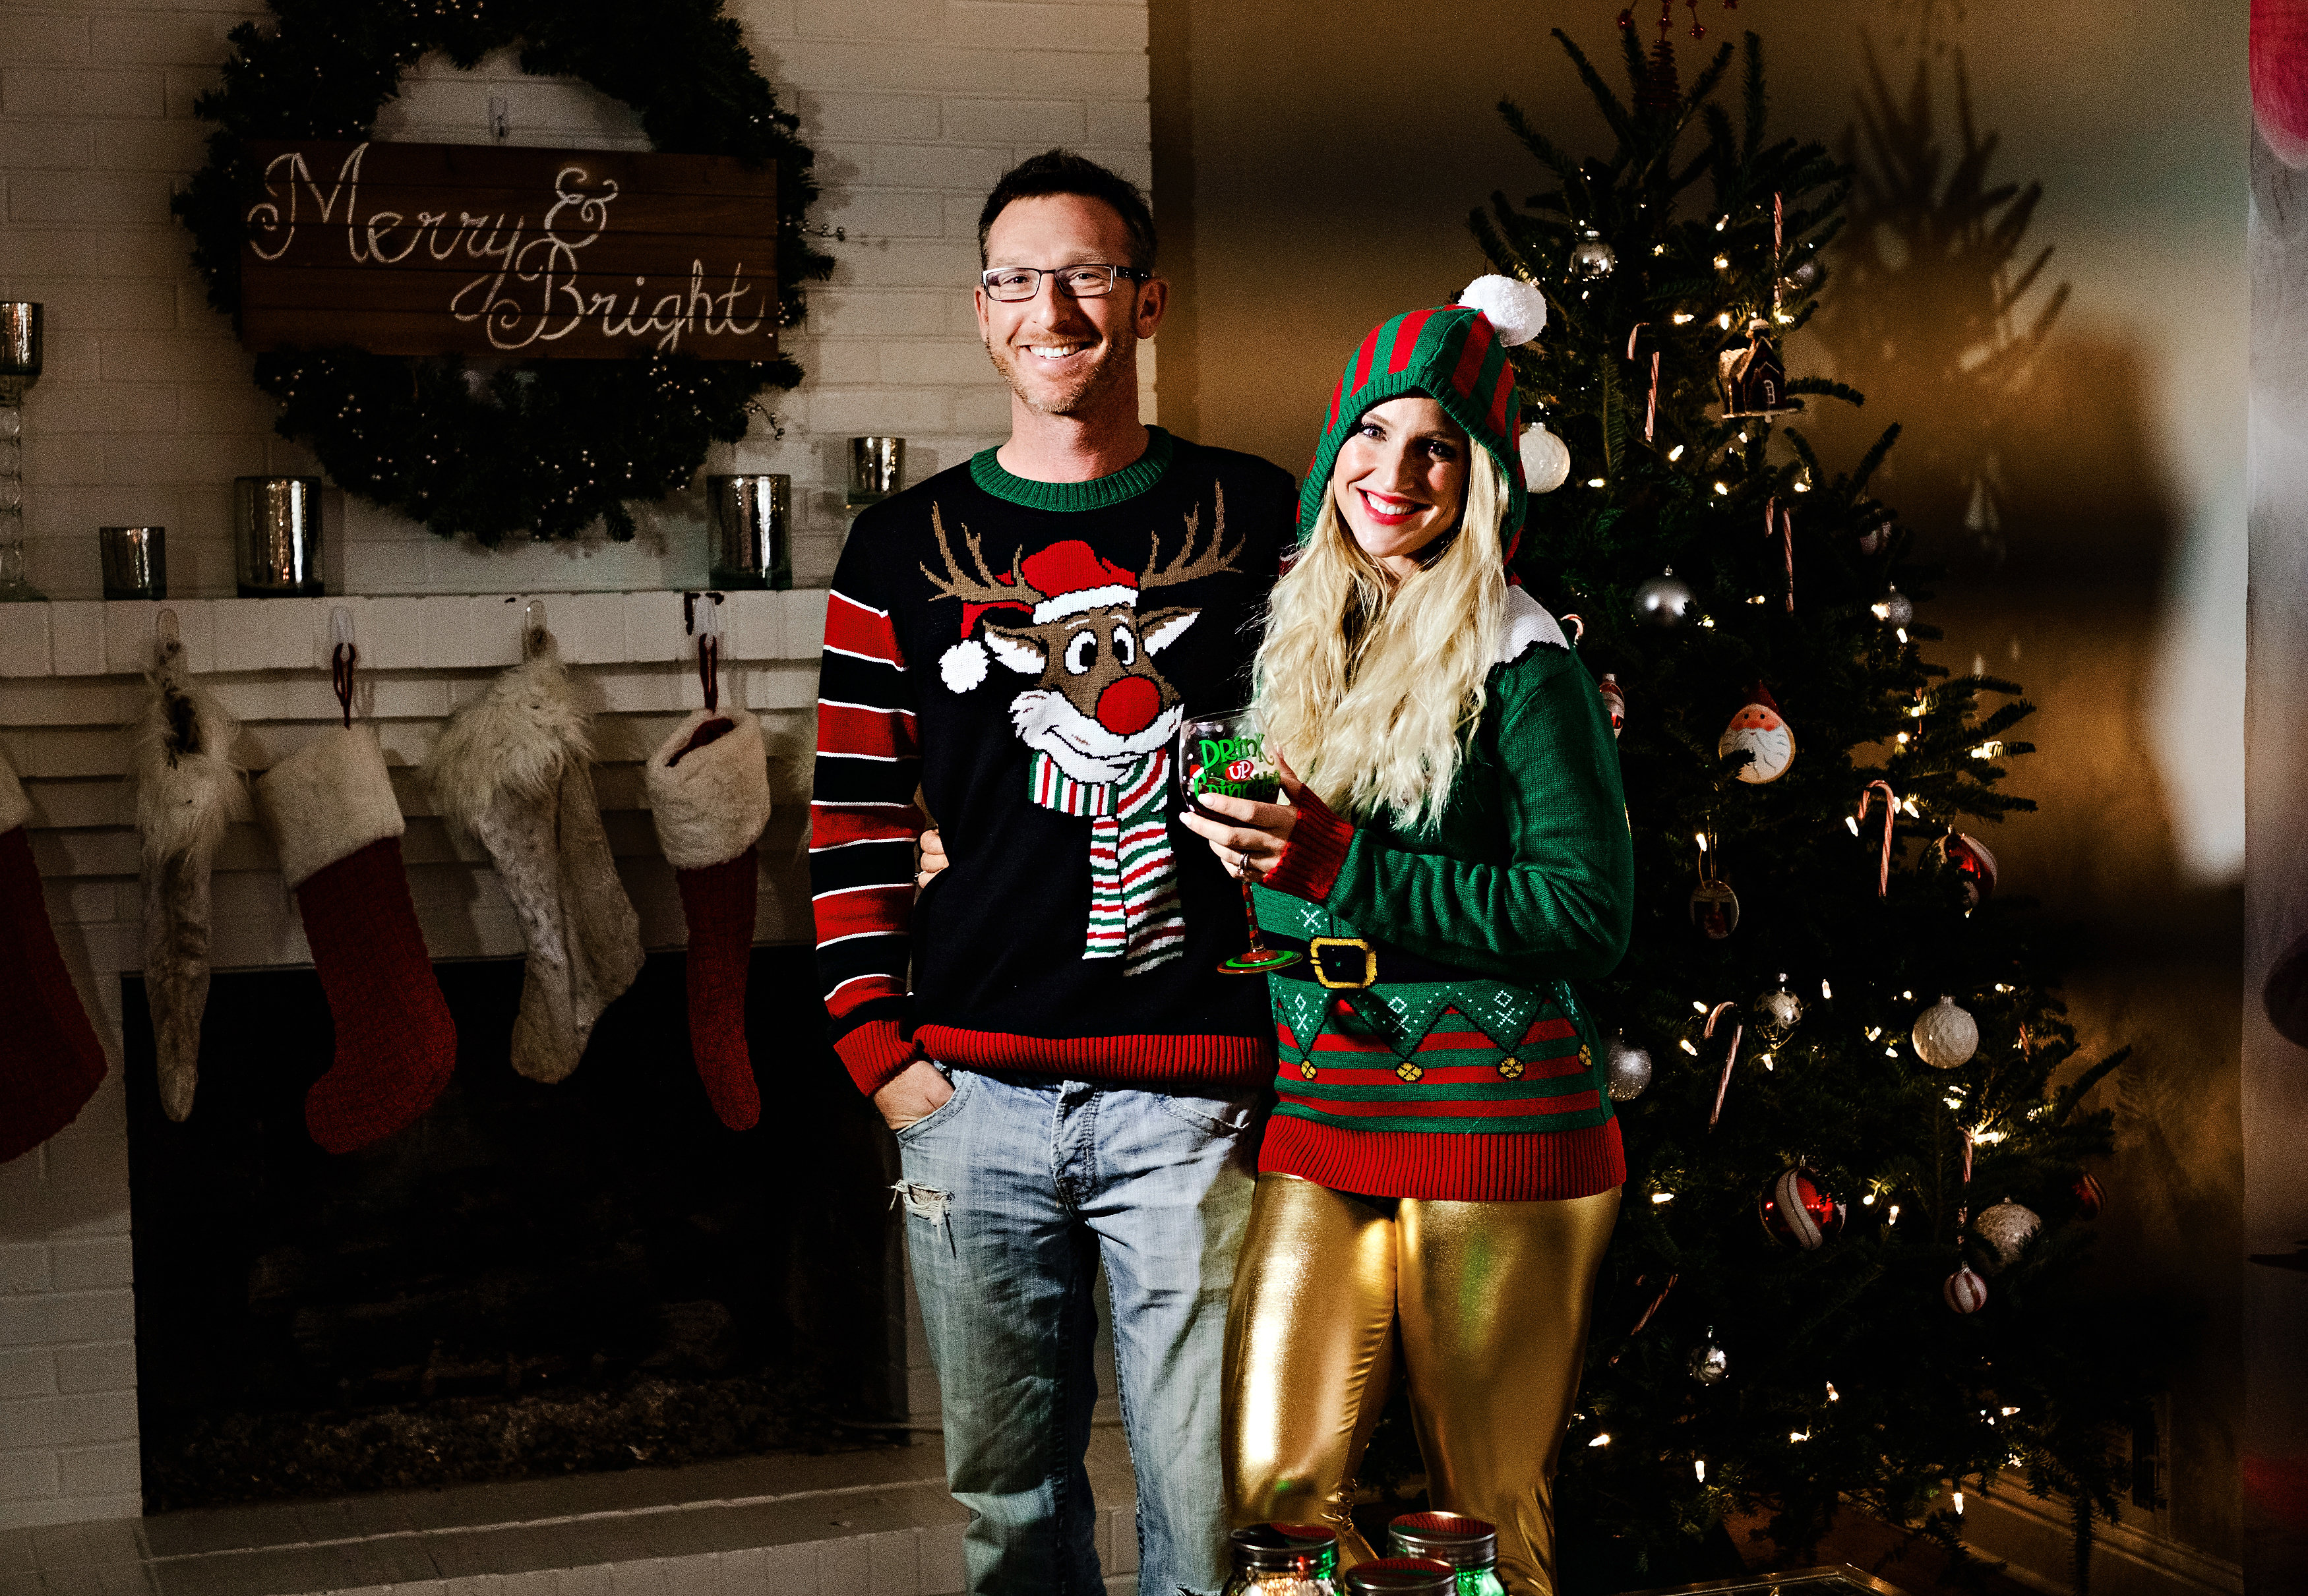 Ugly Sweater Party Ideas and Decor by Atlanta style blogger Happily Hughes